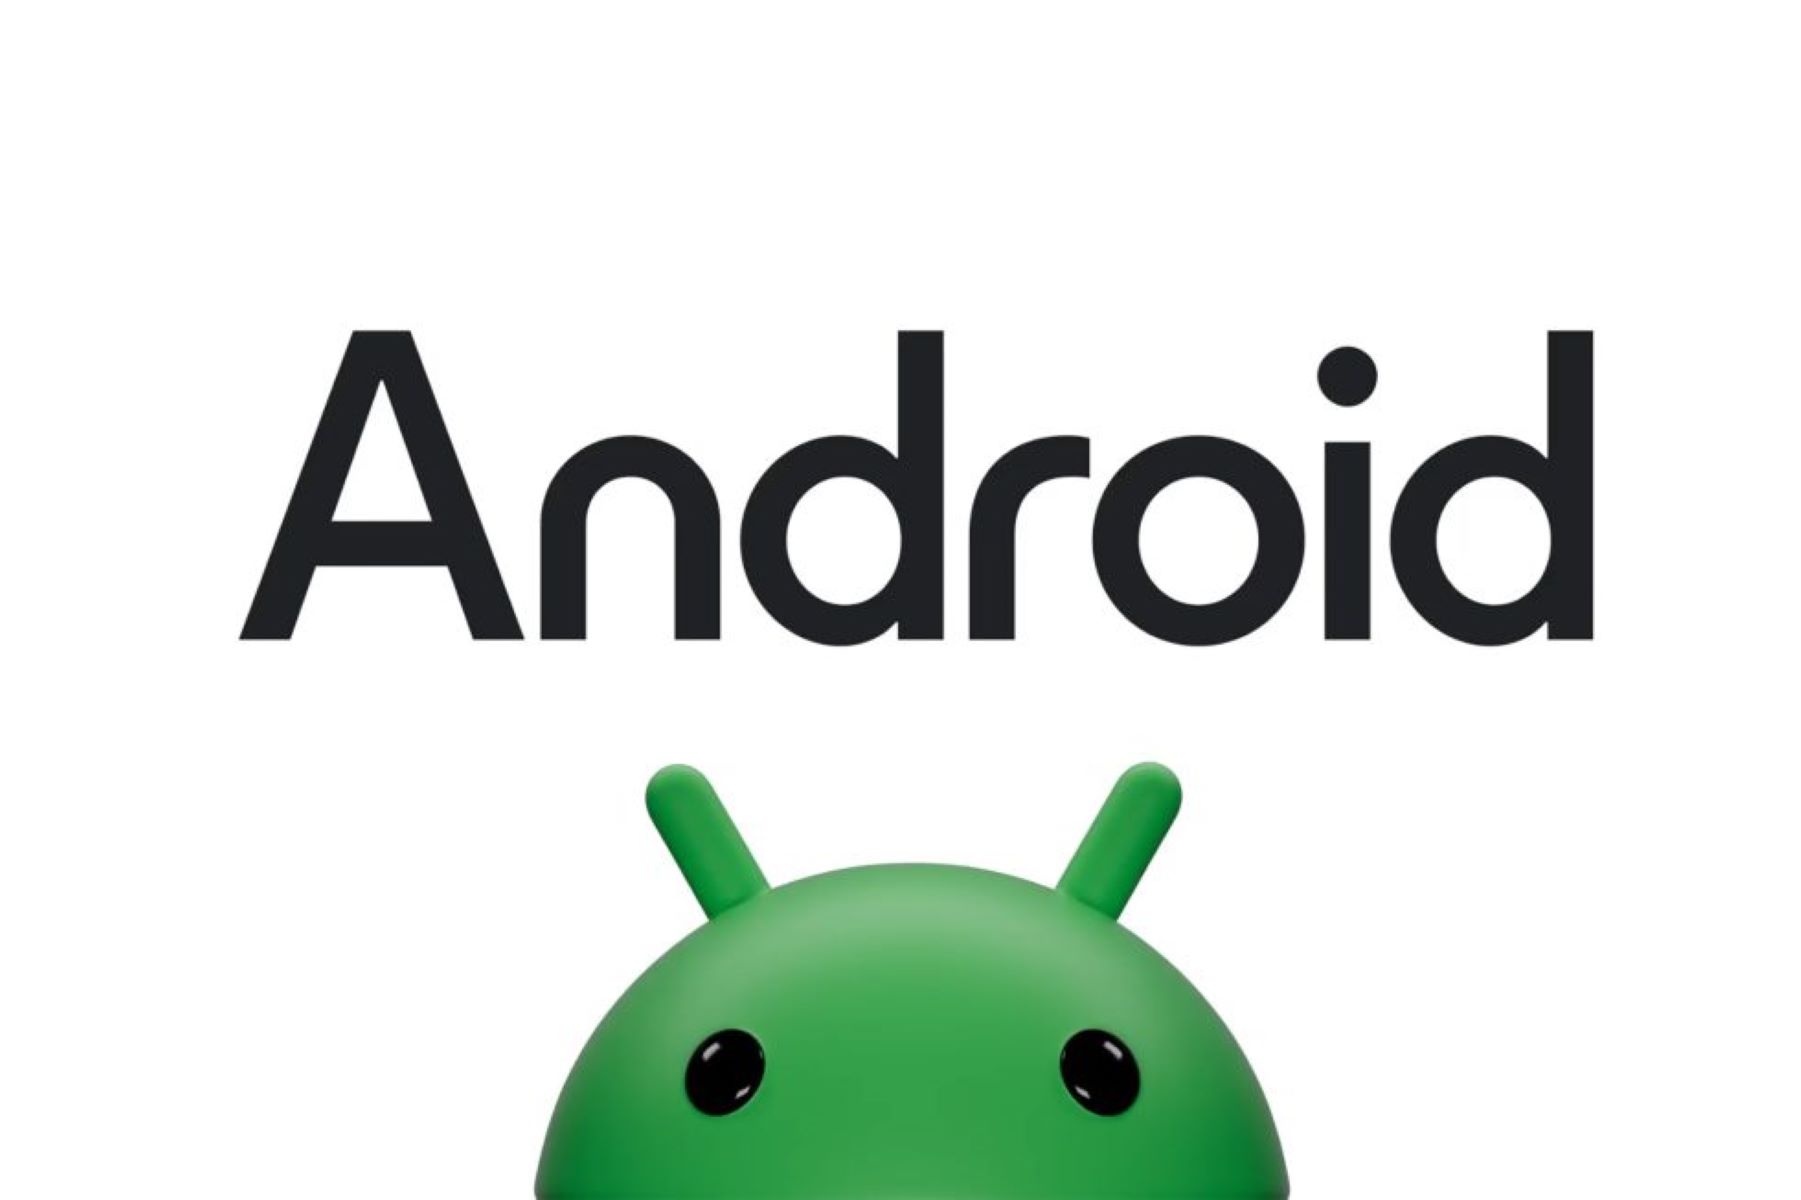 google-introduces-new-3d-logo-and-branding-for-android